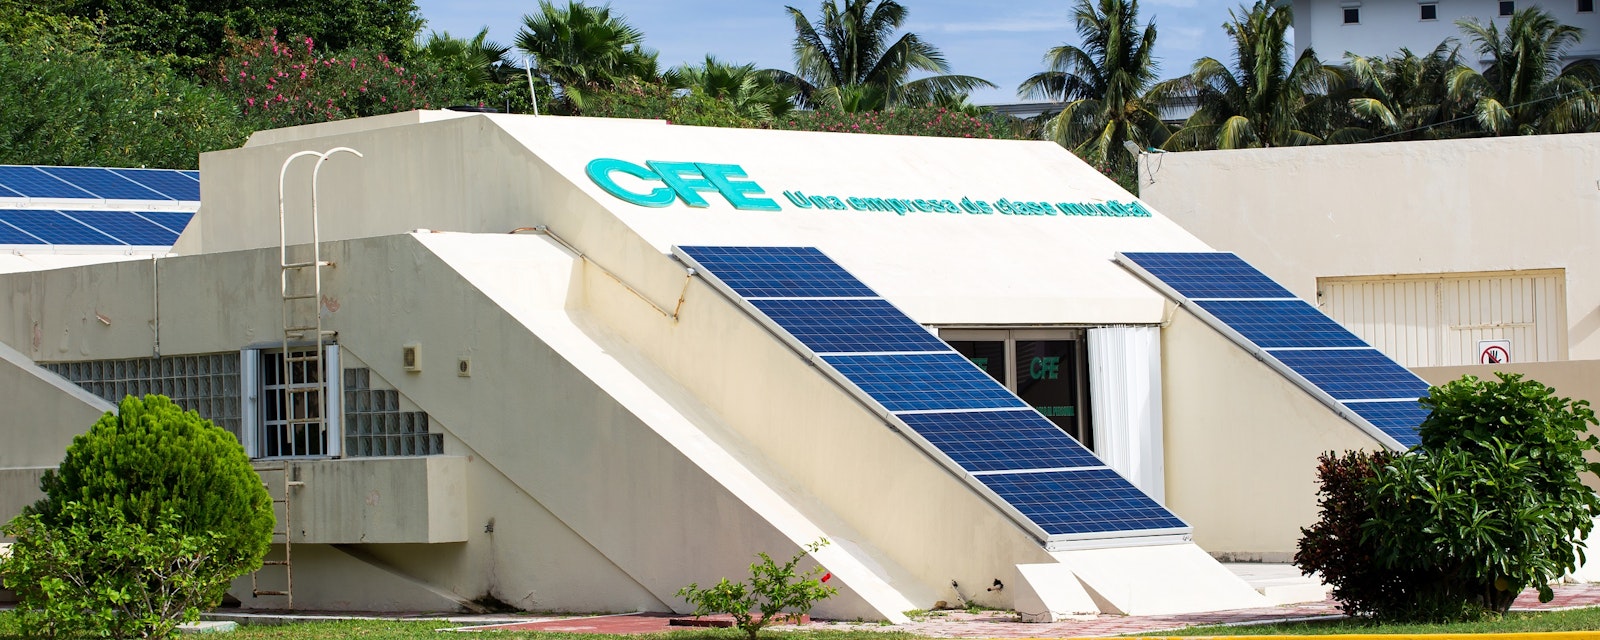 Cancun,,Mexico,-,12,January,2015:,Cfe,-,Federal,Electricity